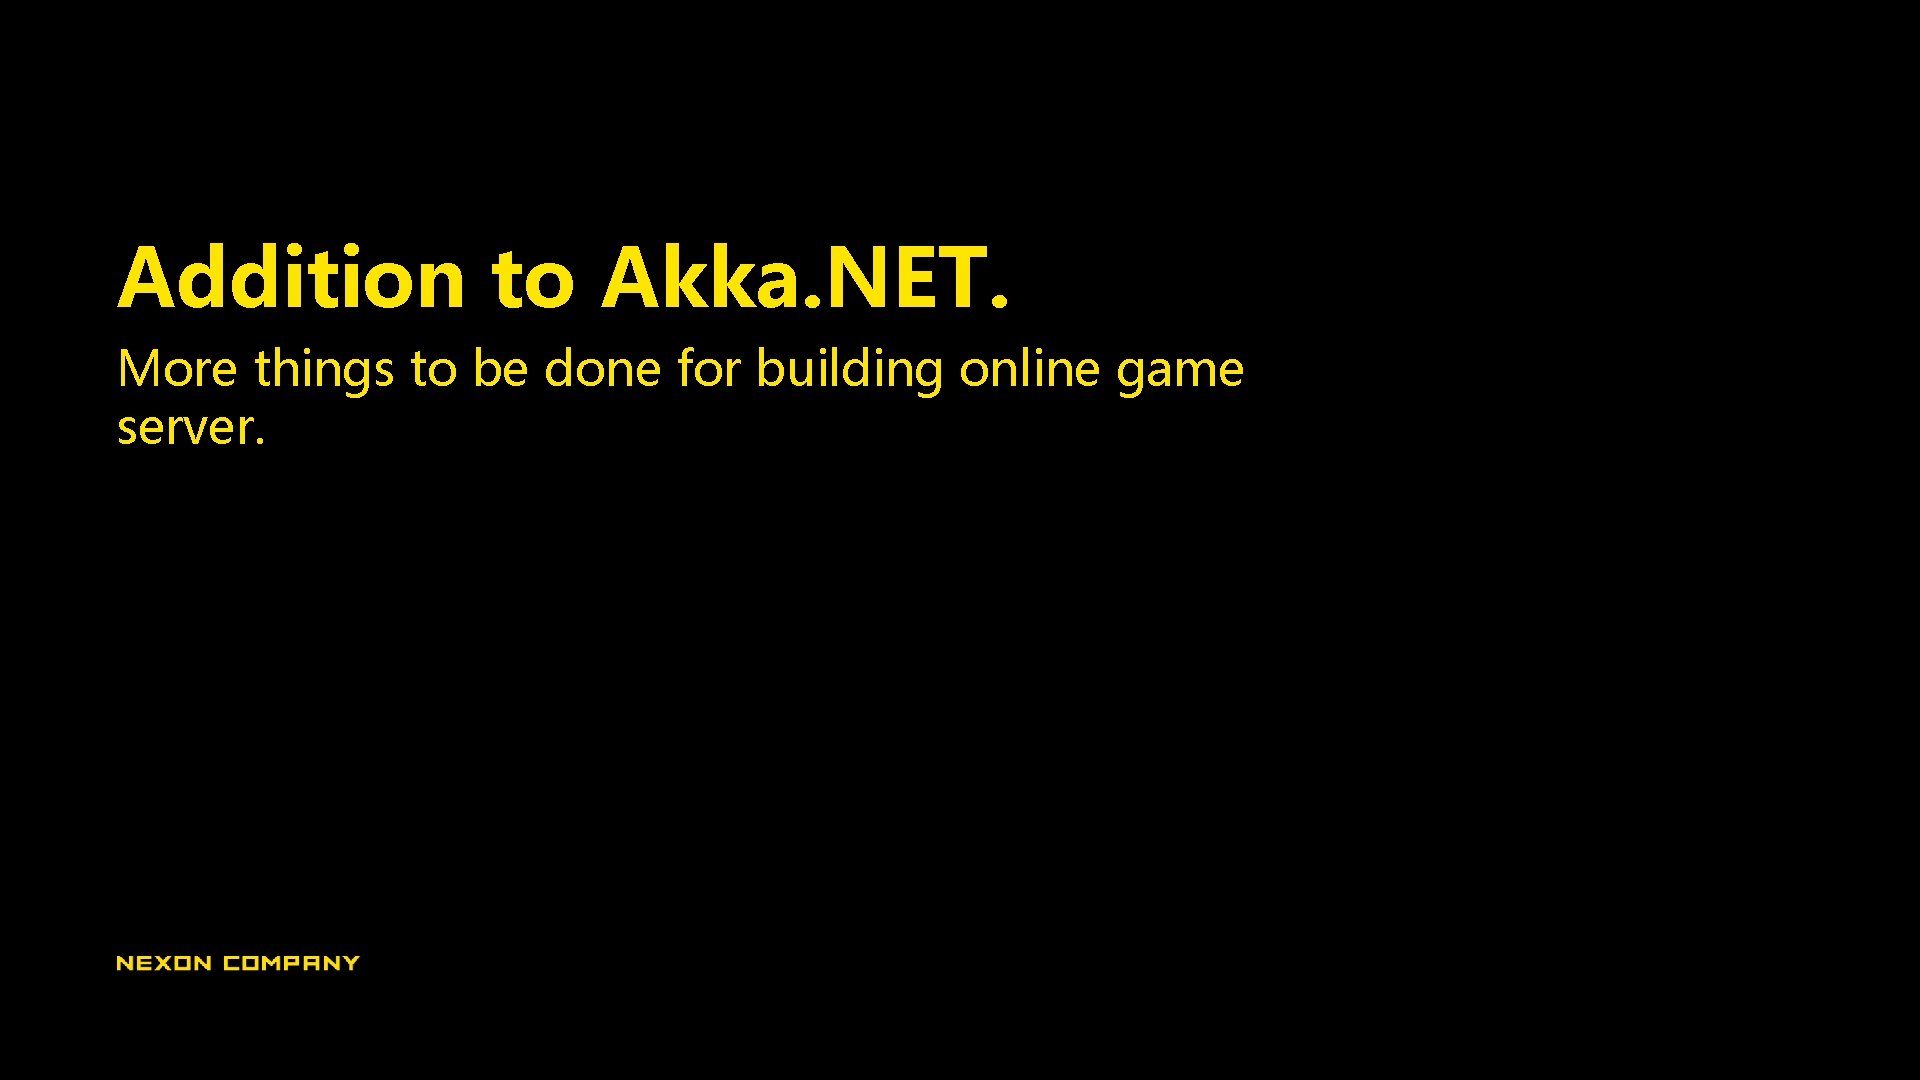 Addition to Akka. NET. More things to be done for building online game server.